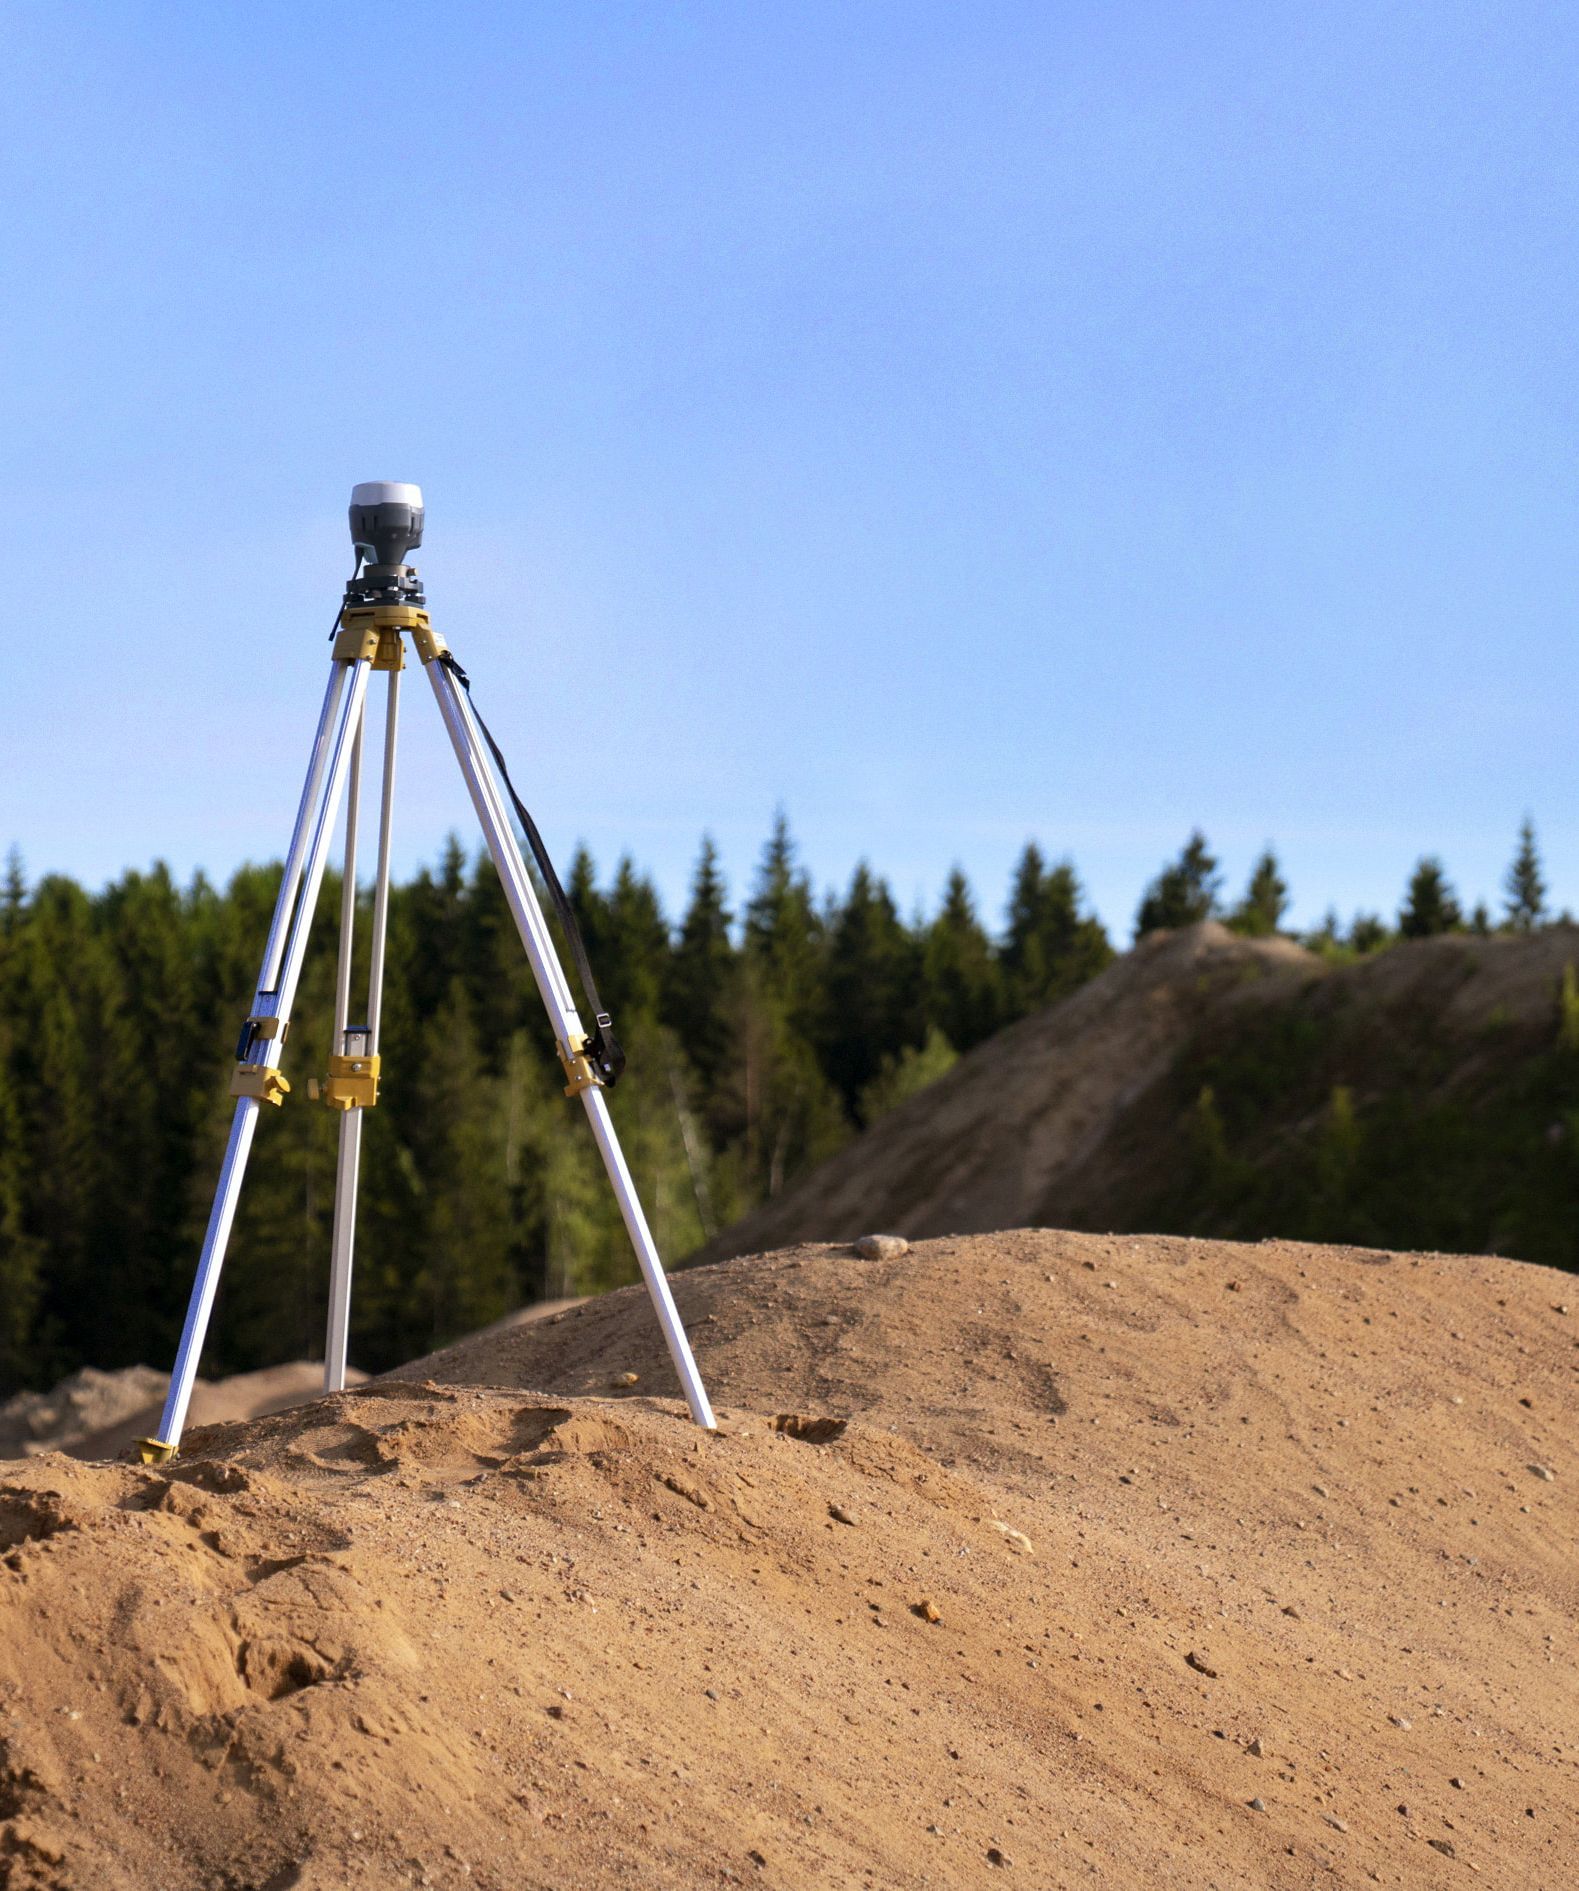 survey tools on a mound of dirt measuring property lines